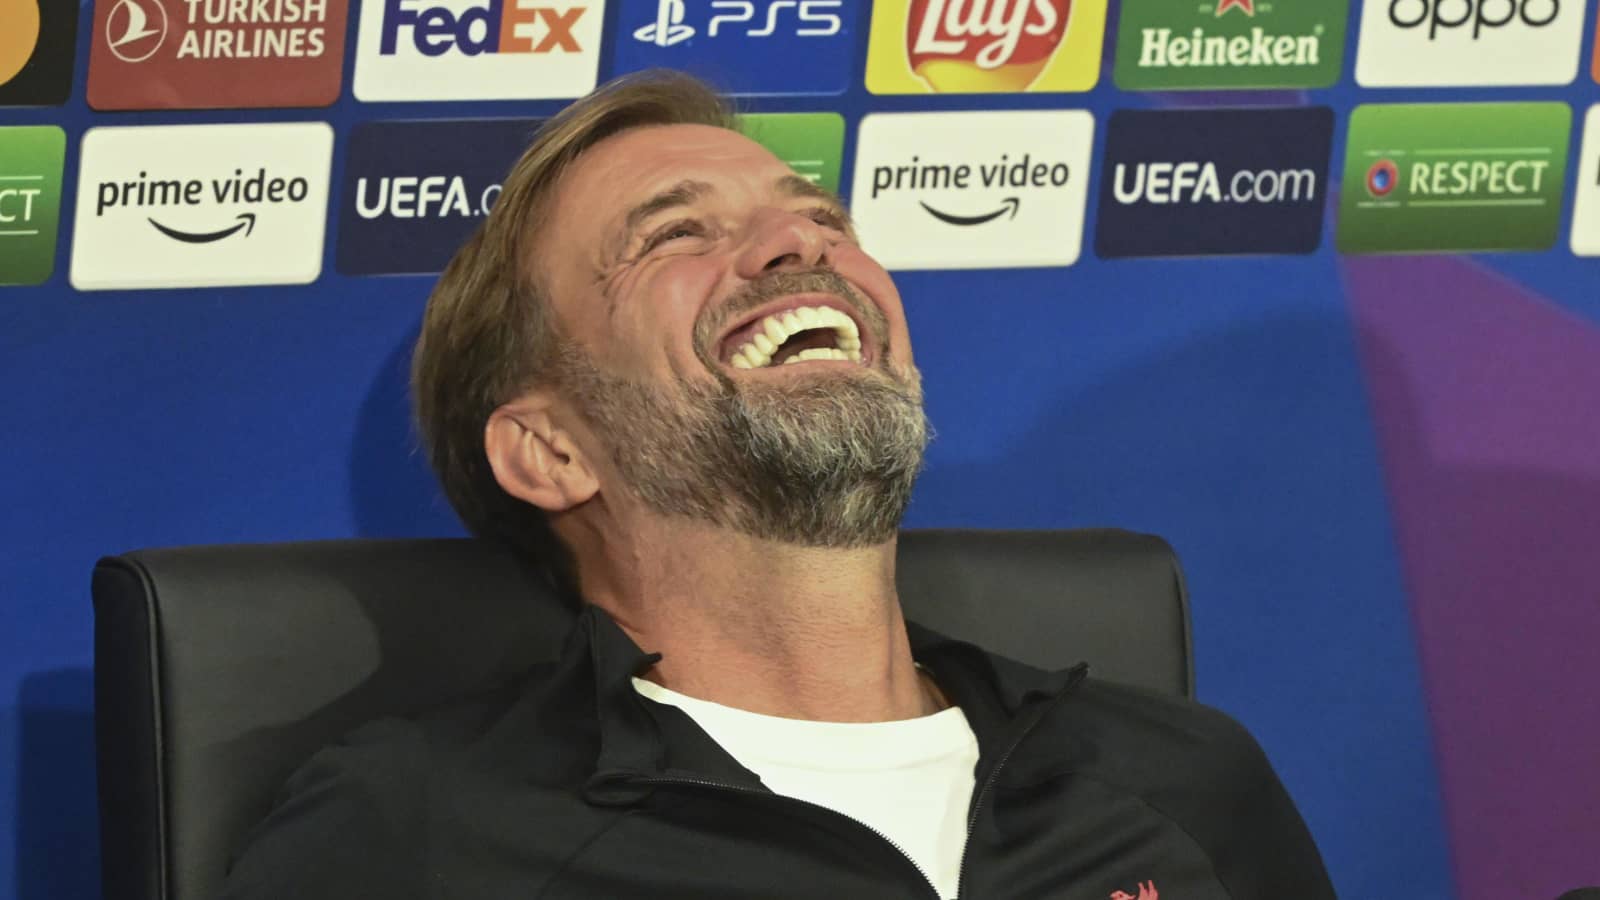 Liverpool ecstatic after confirmed agreement gives Klopp his own Lionel Messi